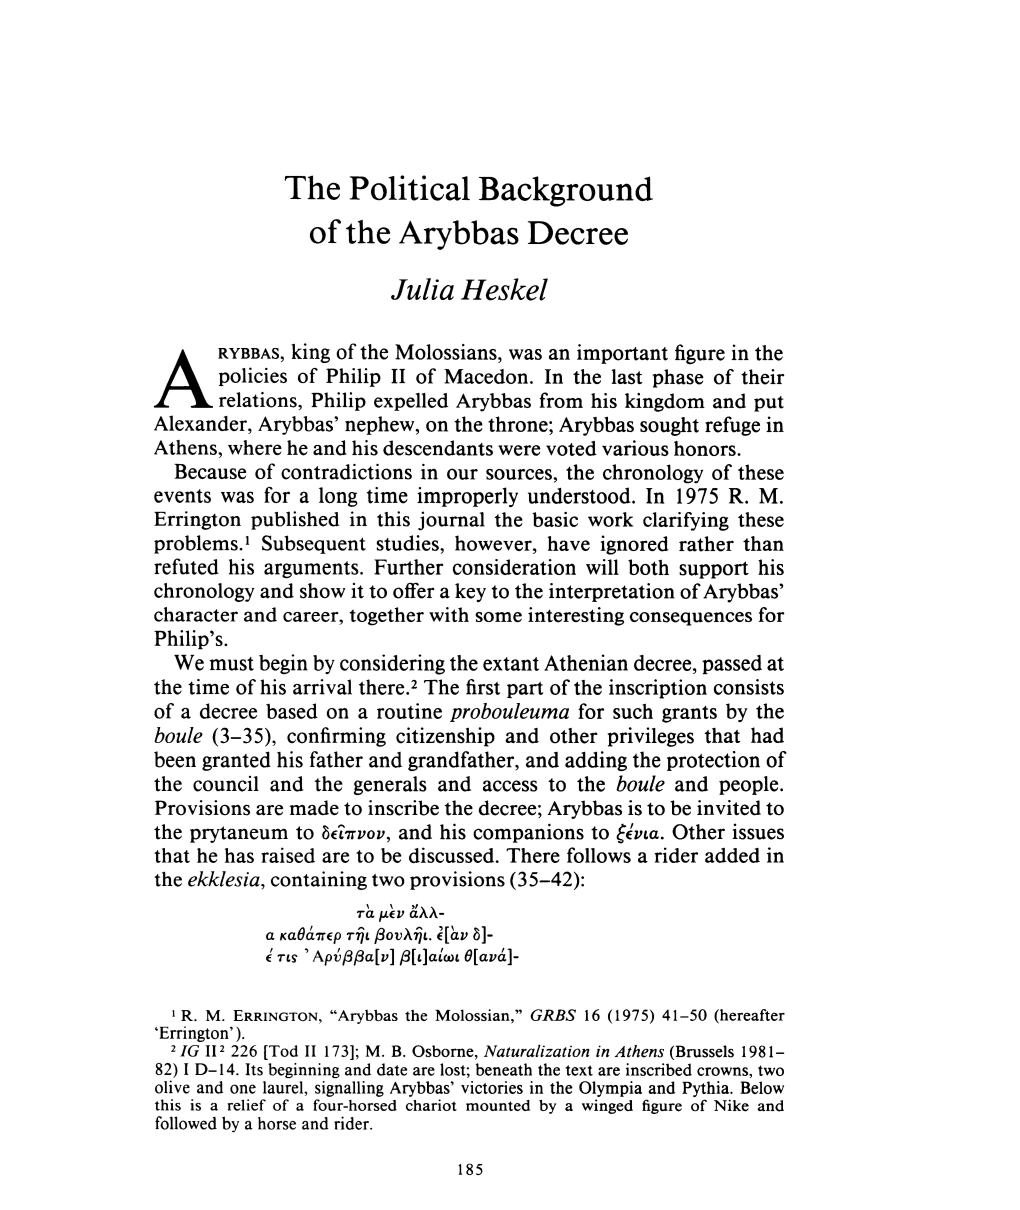 The Political Background of the Arybbas Decree , Greek, Roman and Byzantine Studies, 29:2 (1988:Summer) P.185